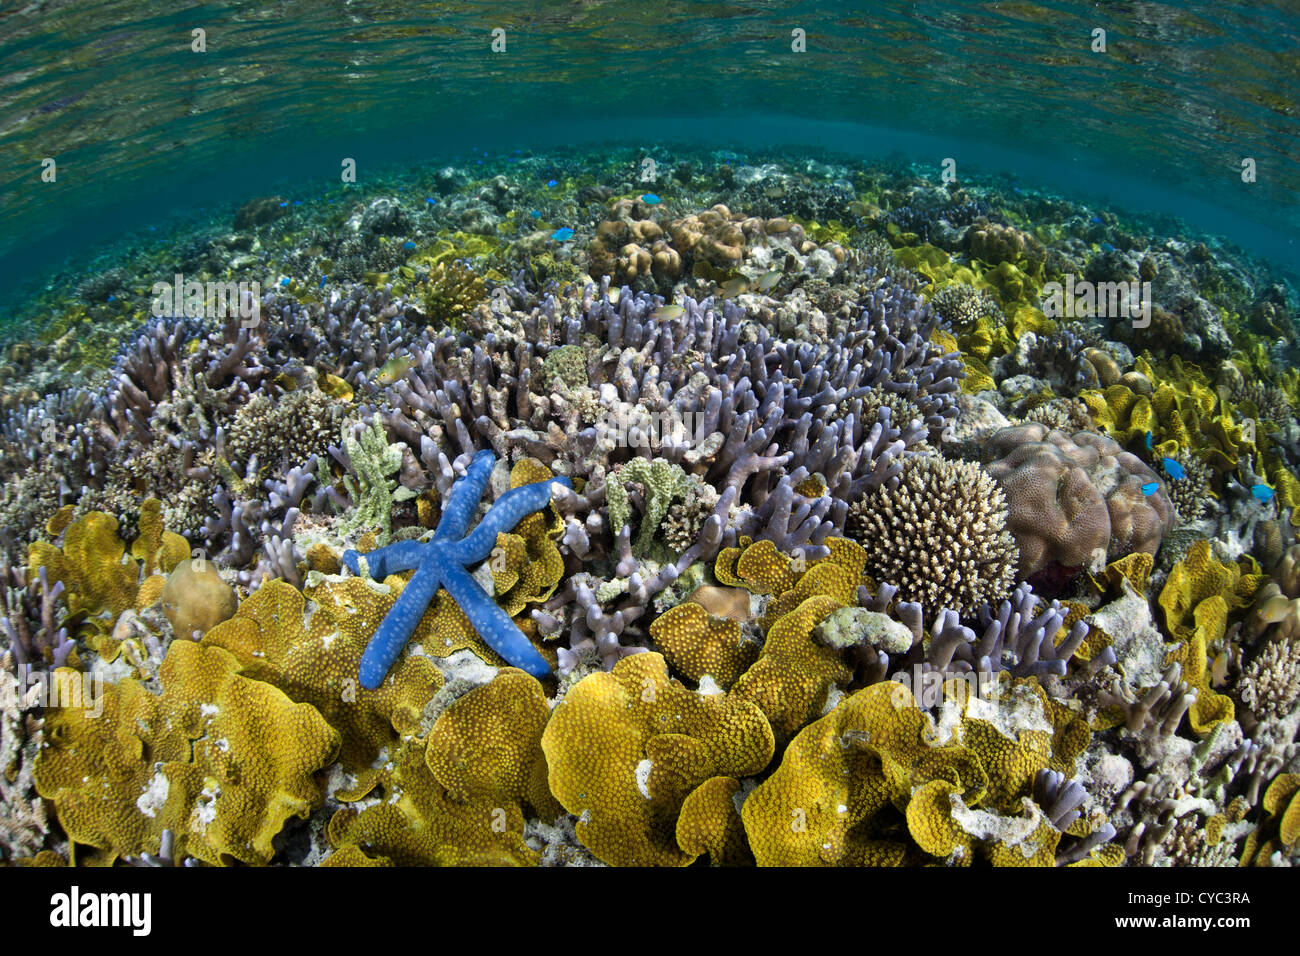 A blue seastar, Linkia laevigata, lies on a healthy shallow reef that is covered by reef-building corals. Stock Photo